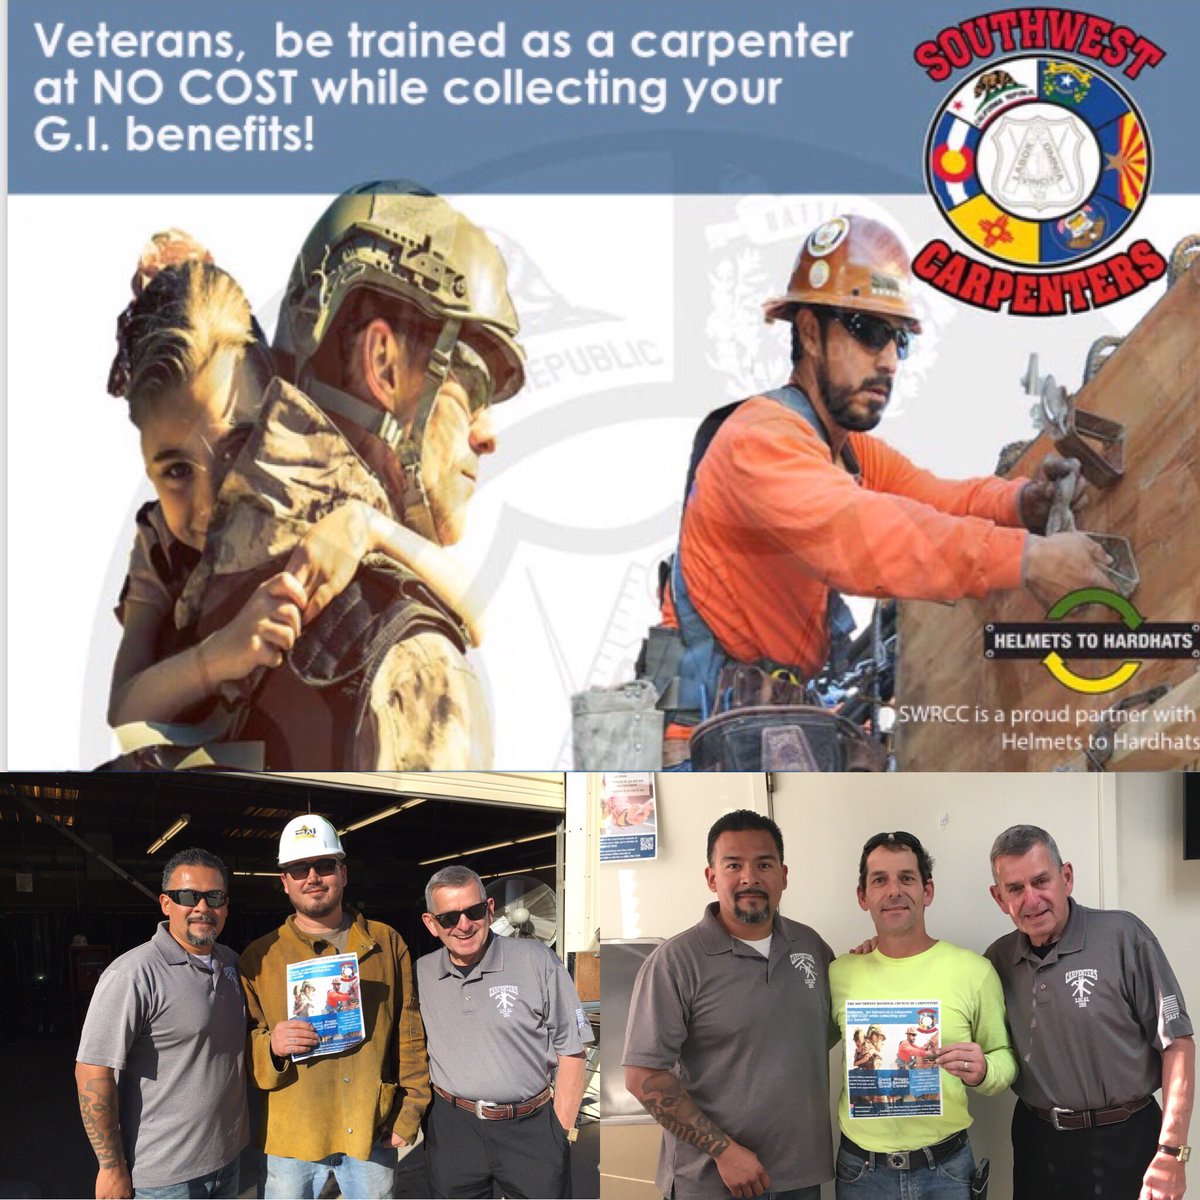 Official Ubc On Twitter Install And Helmets To Hardhats A Winning Team To Read The Full Story On The Partnership That Connects Vets With Training And Jobs Click Here Https T Co 0gj2d6pipx Https T Co 9knzytz3j2